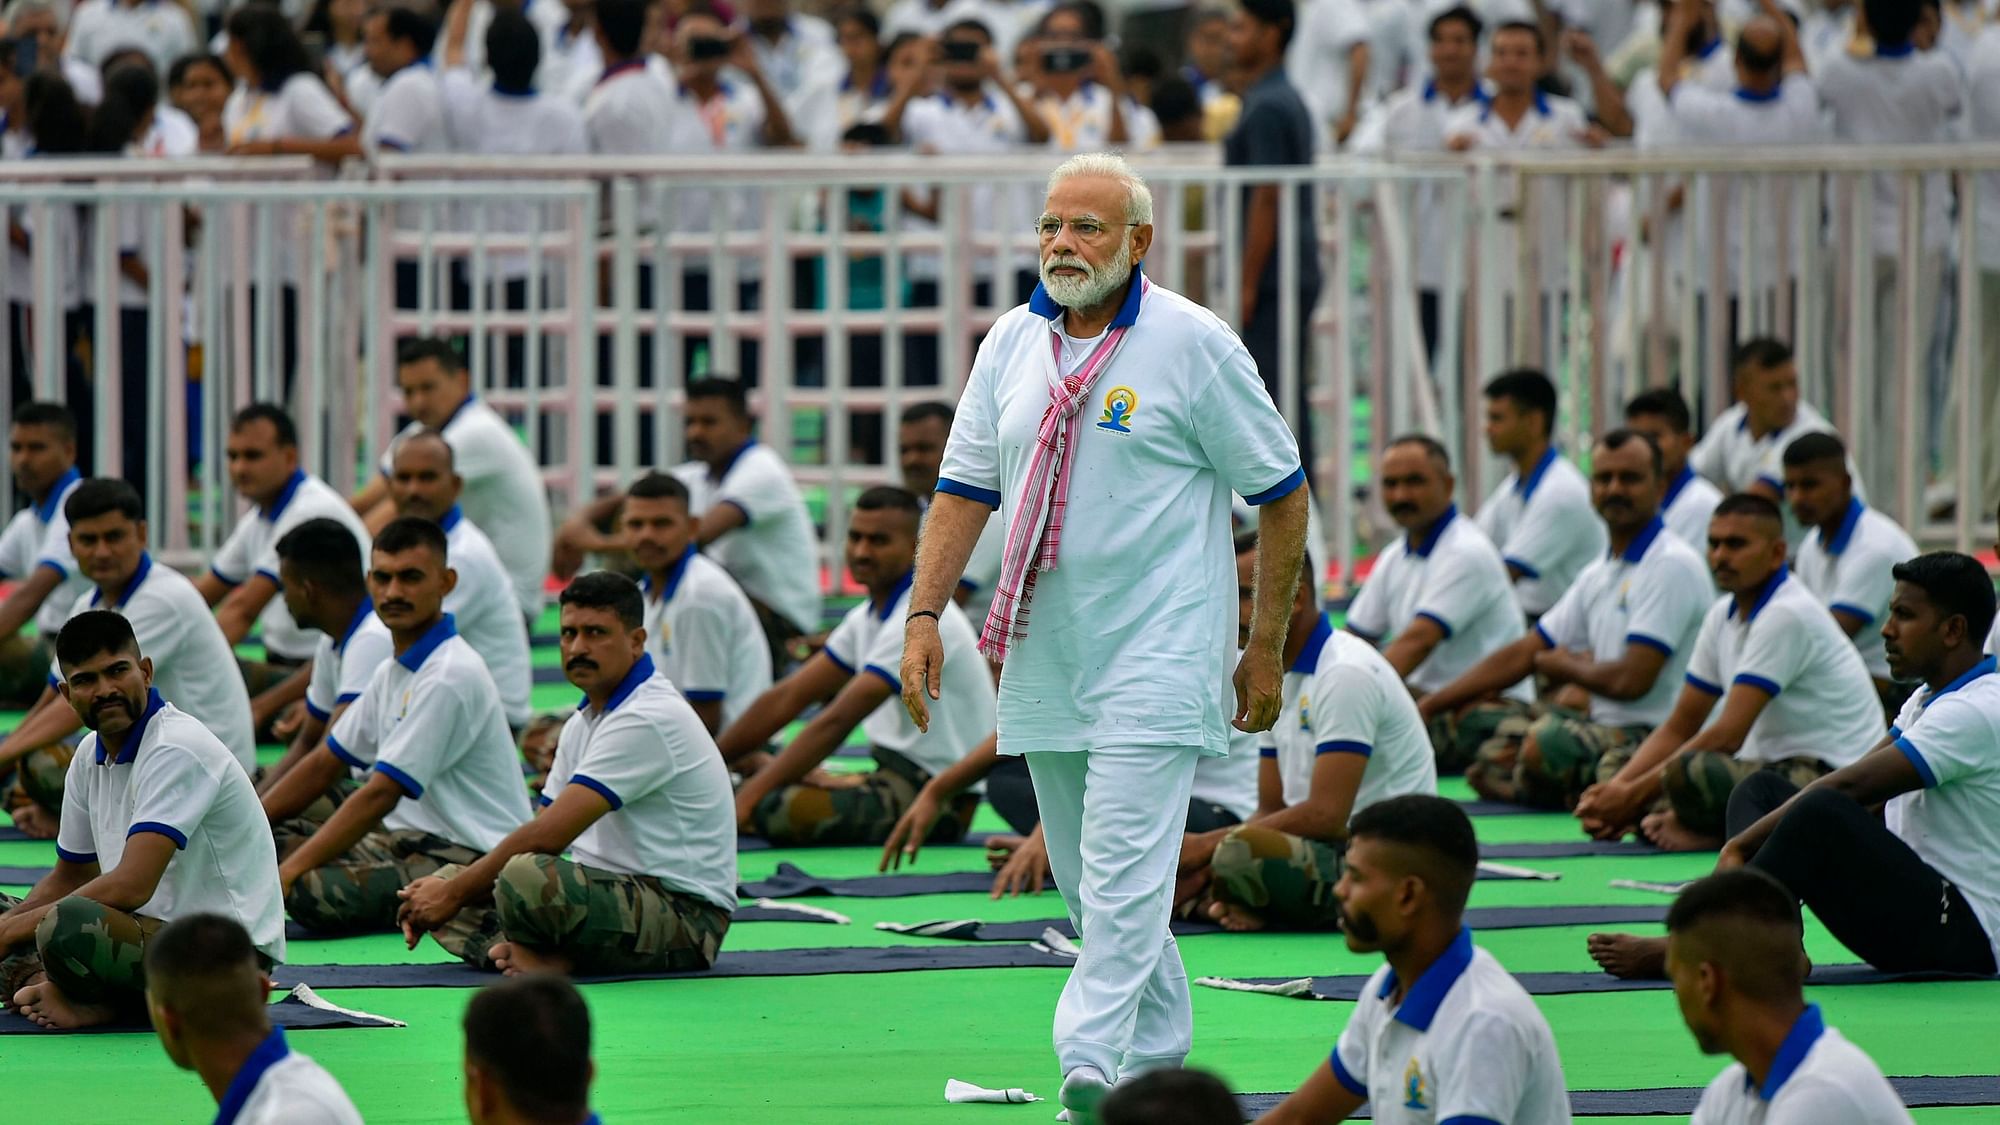 Prime Minister Narendra Modi performed yoga with around 40,000 enthusiasts.